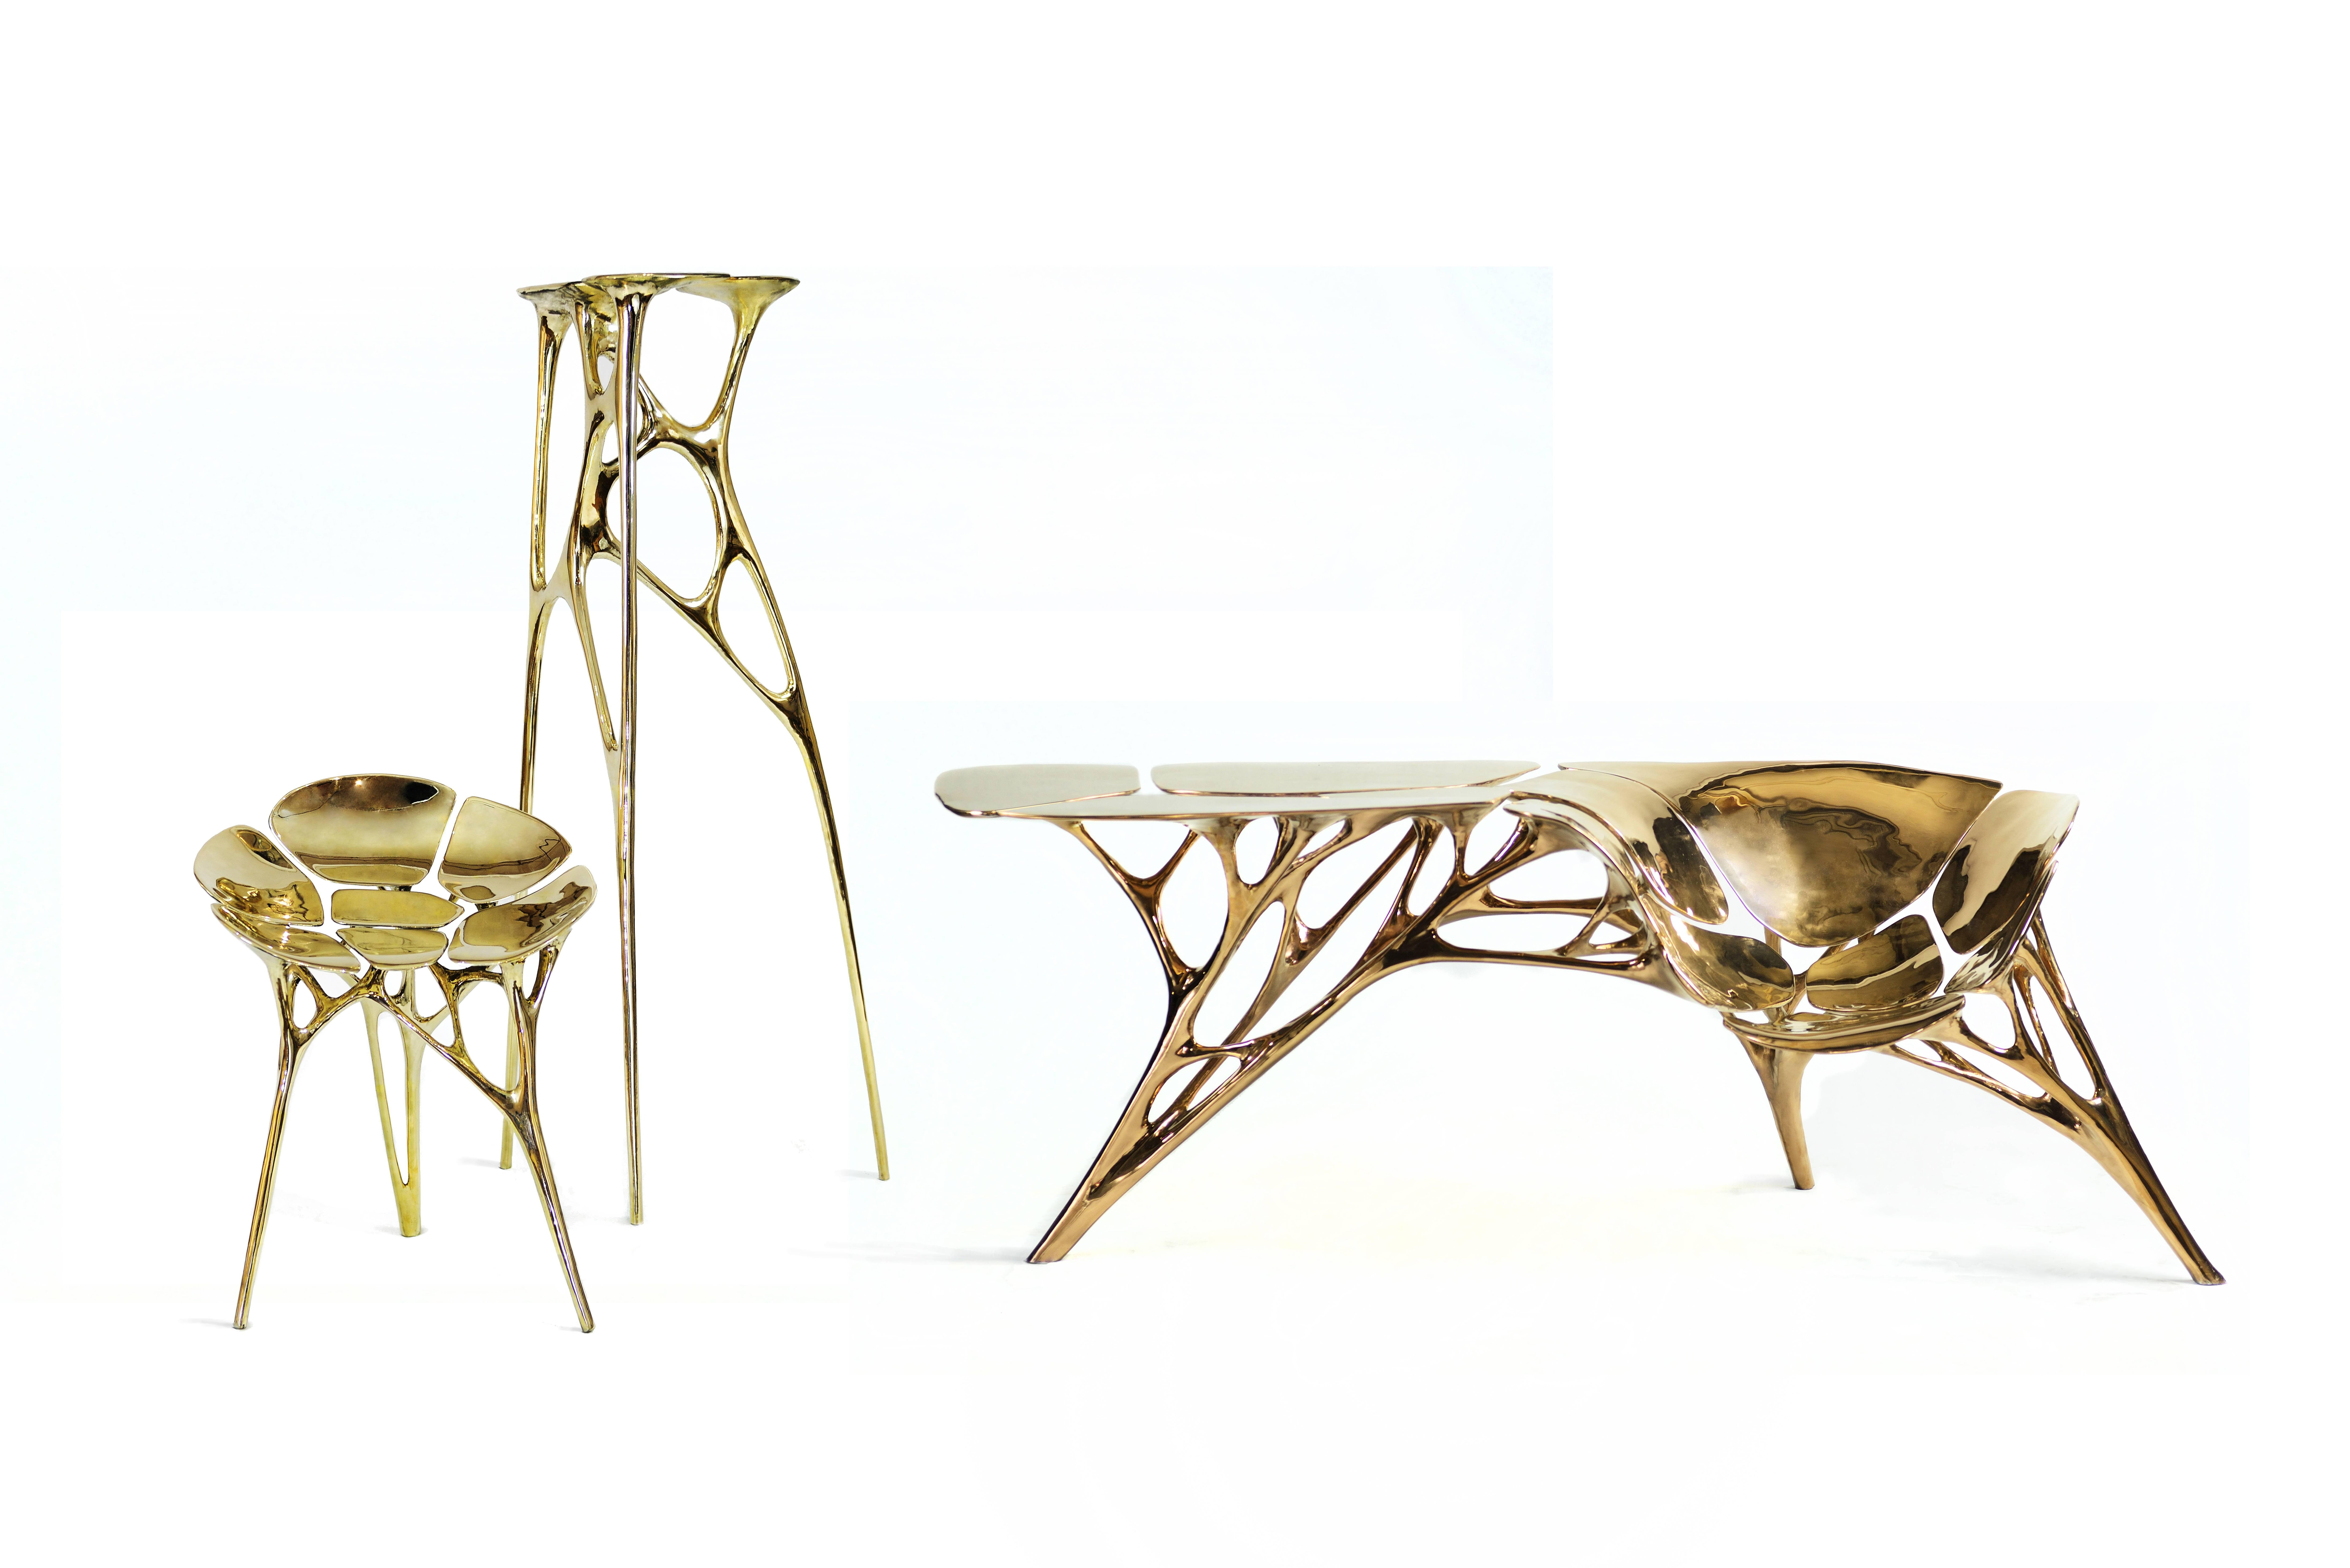 Chinese Polished Brass Lotus Console Table/Telephone Table/Entryway Table in Gold Color